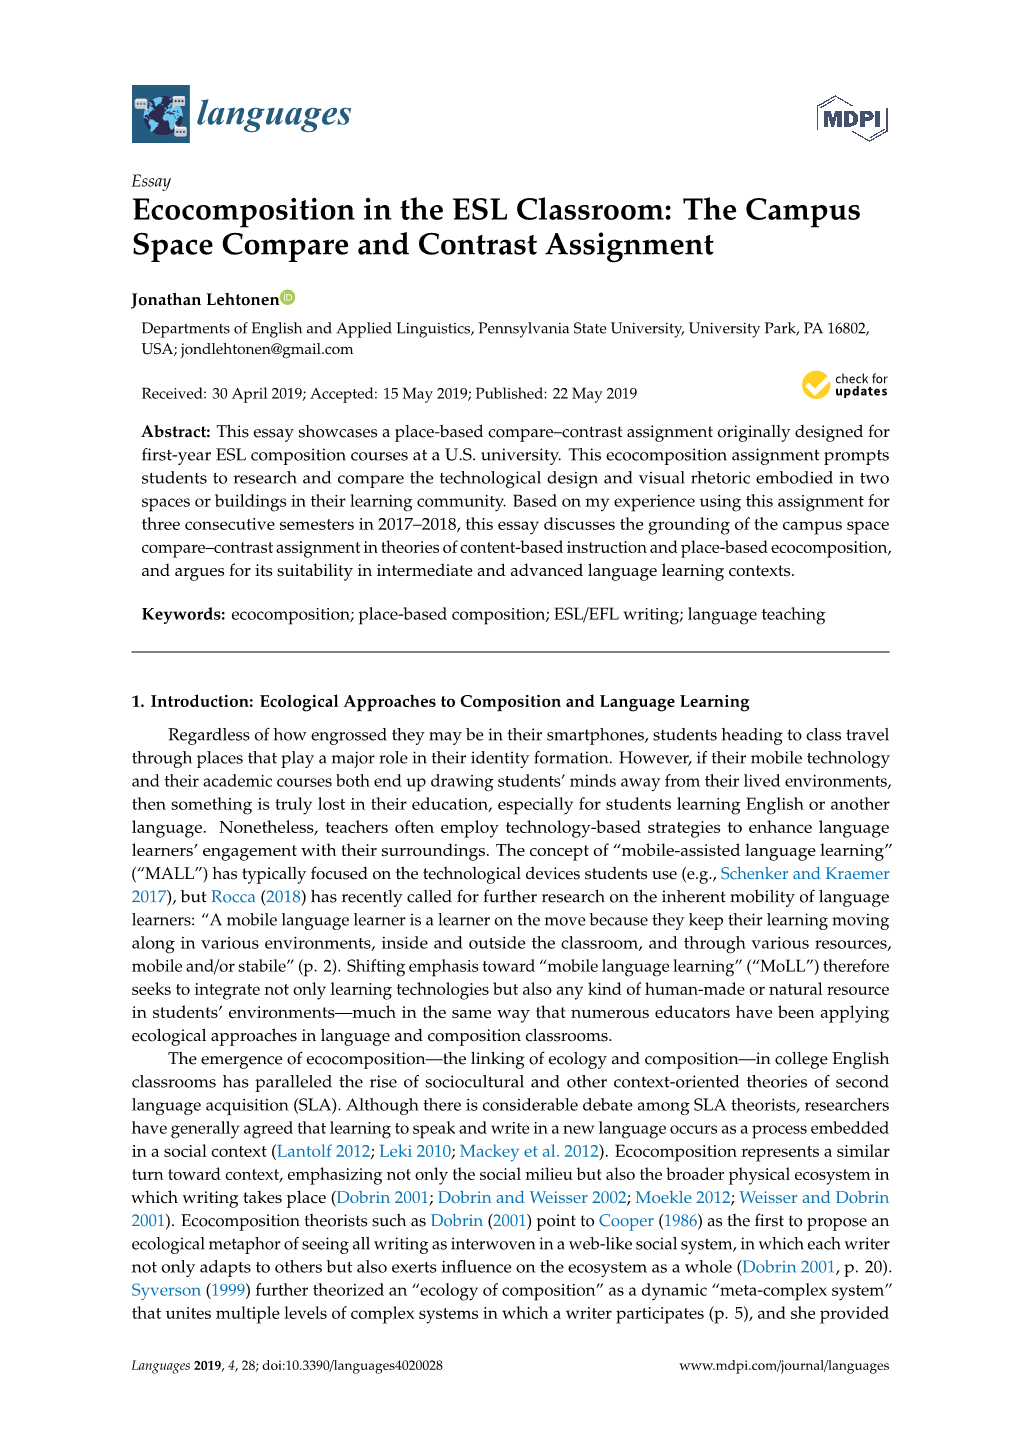 Ecocomposition in the ESL Classroom: the Campus Space Compare and Contrast Assignment